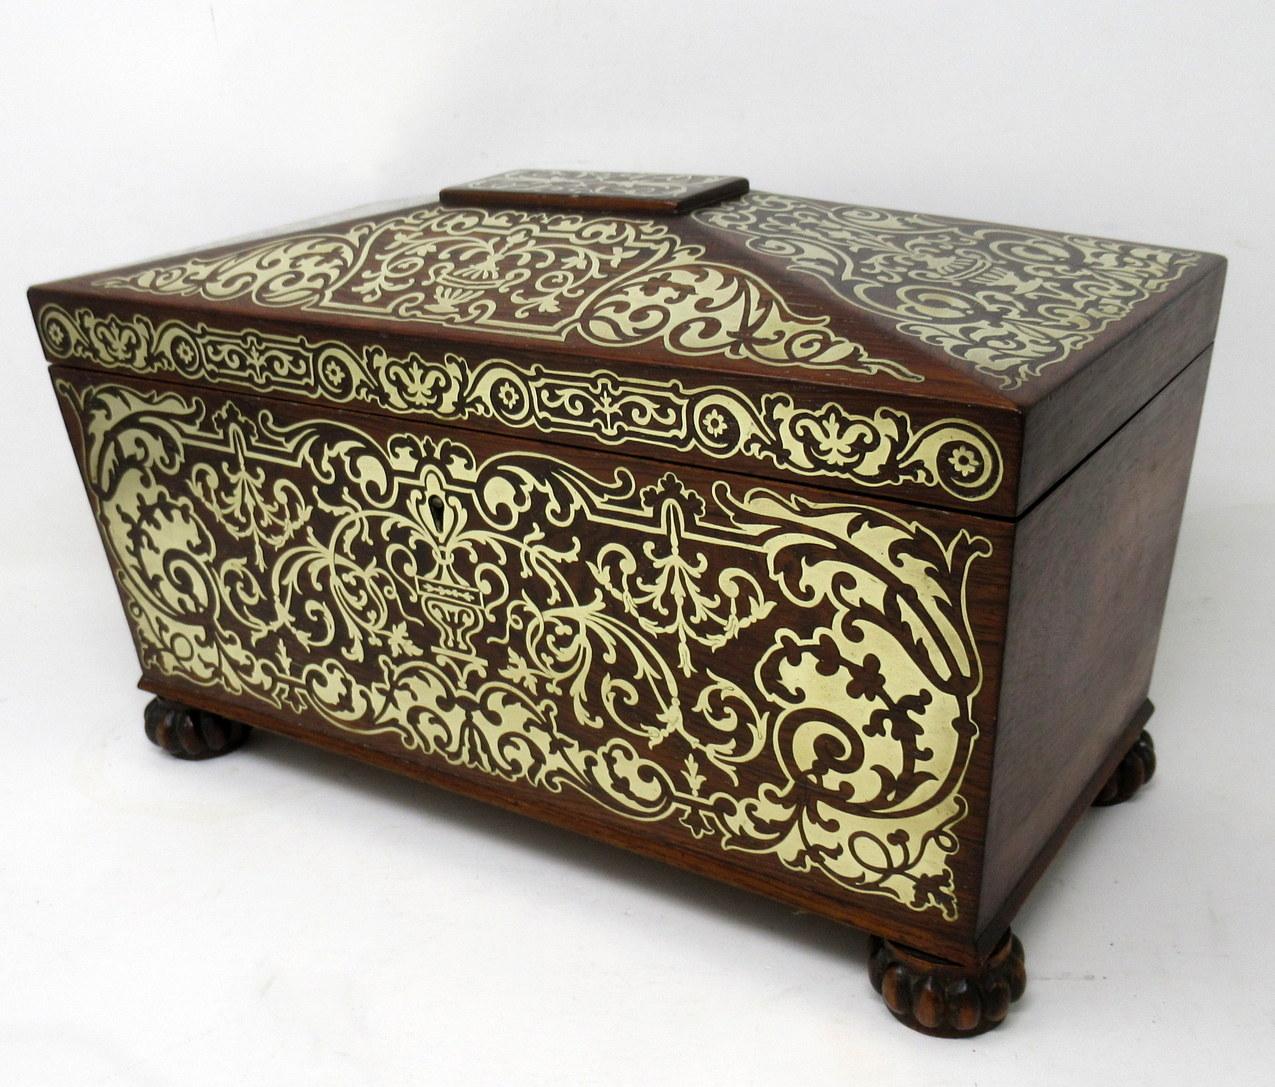 19th Century Antique Brass Inlaid Mahogany English Tea Caddy Box Regency Gillows Lancaster For Sale